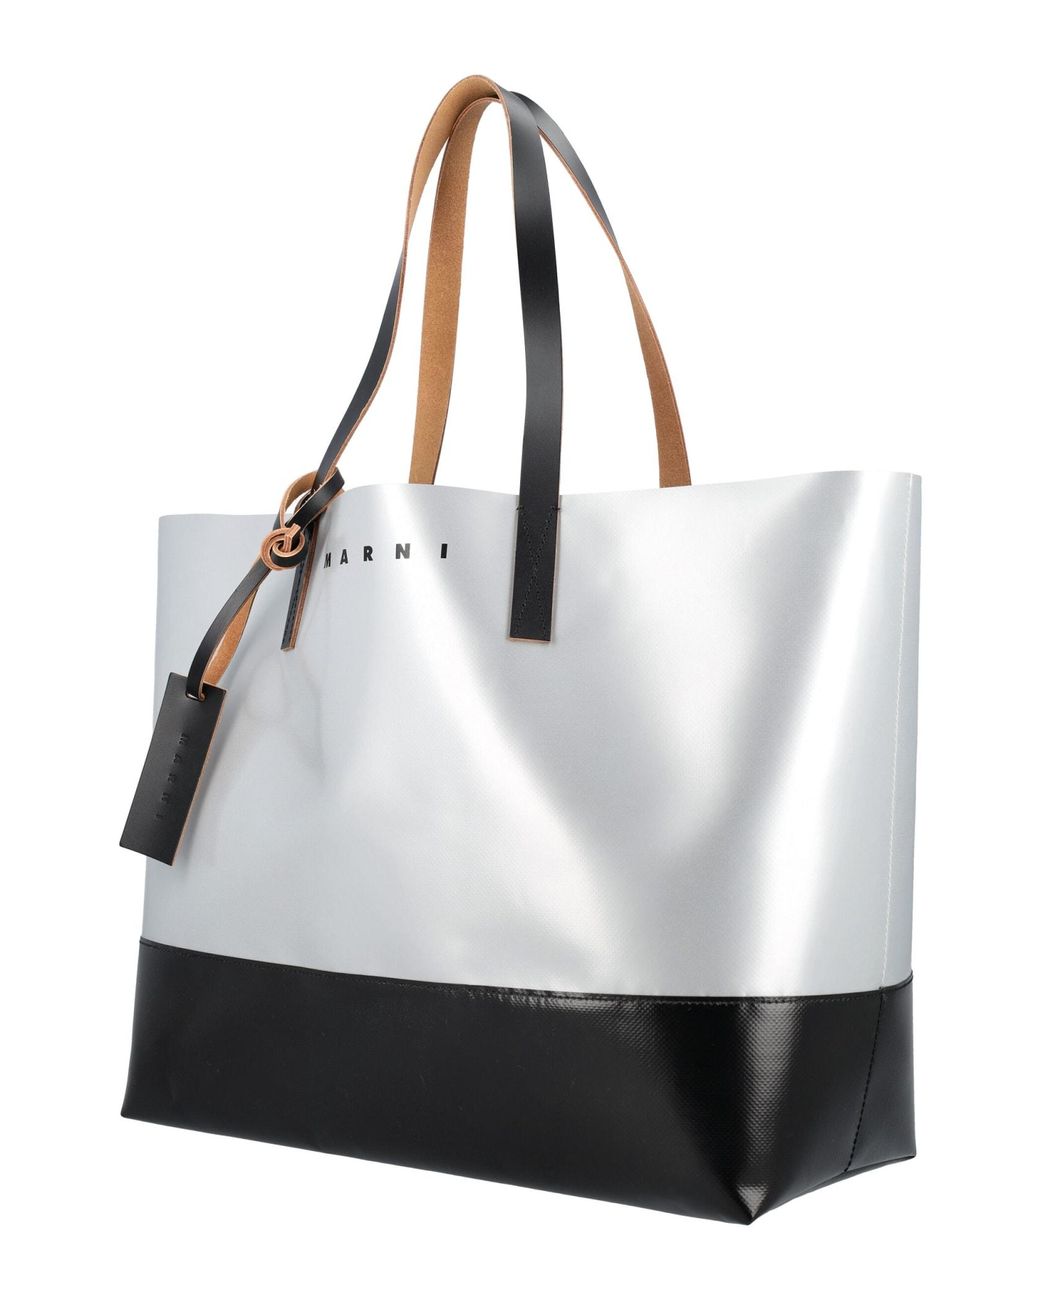 Save 34% Mens Bags Tote bags Marni Leather Two Tone Tribeca Shopping Bag in Silver Black White for Men 